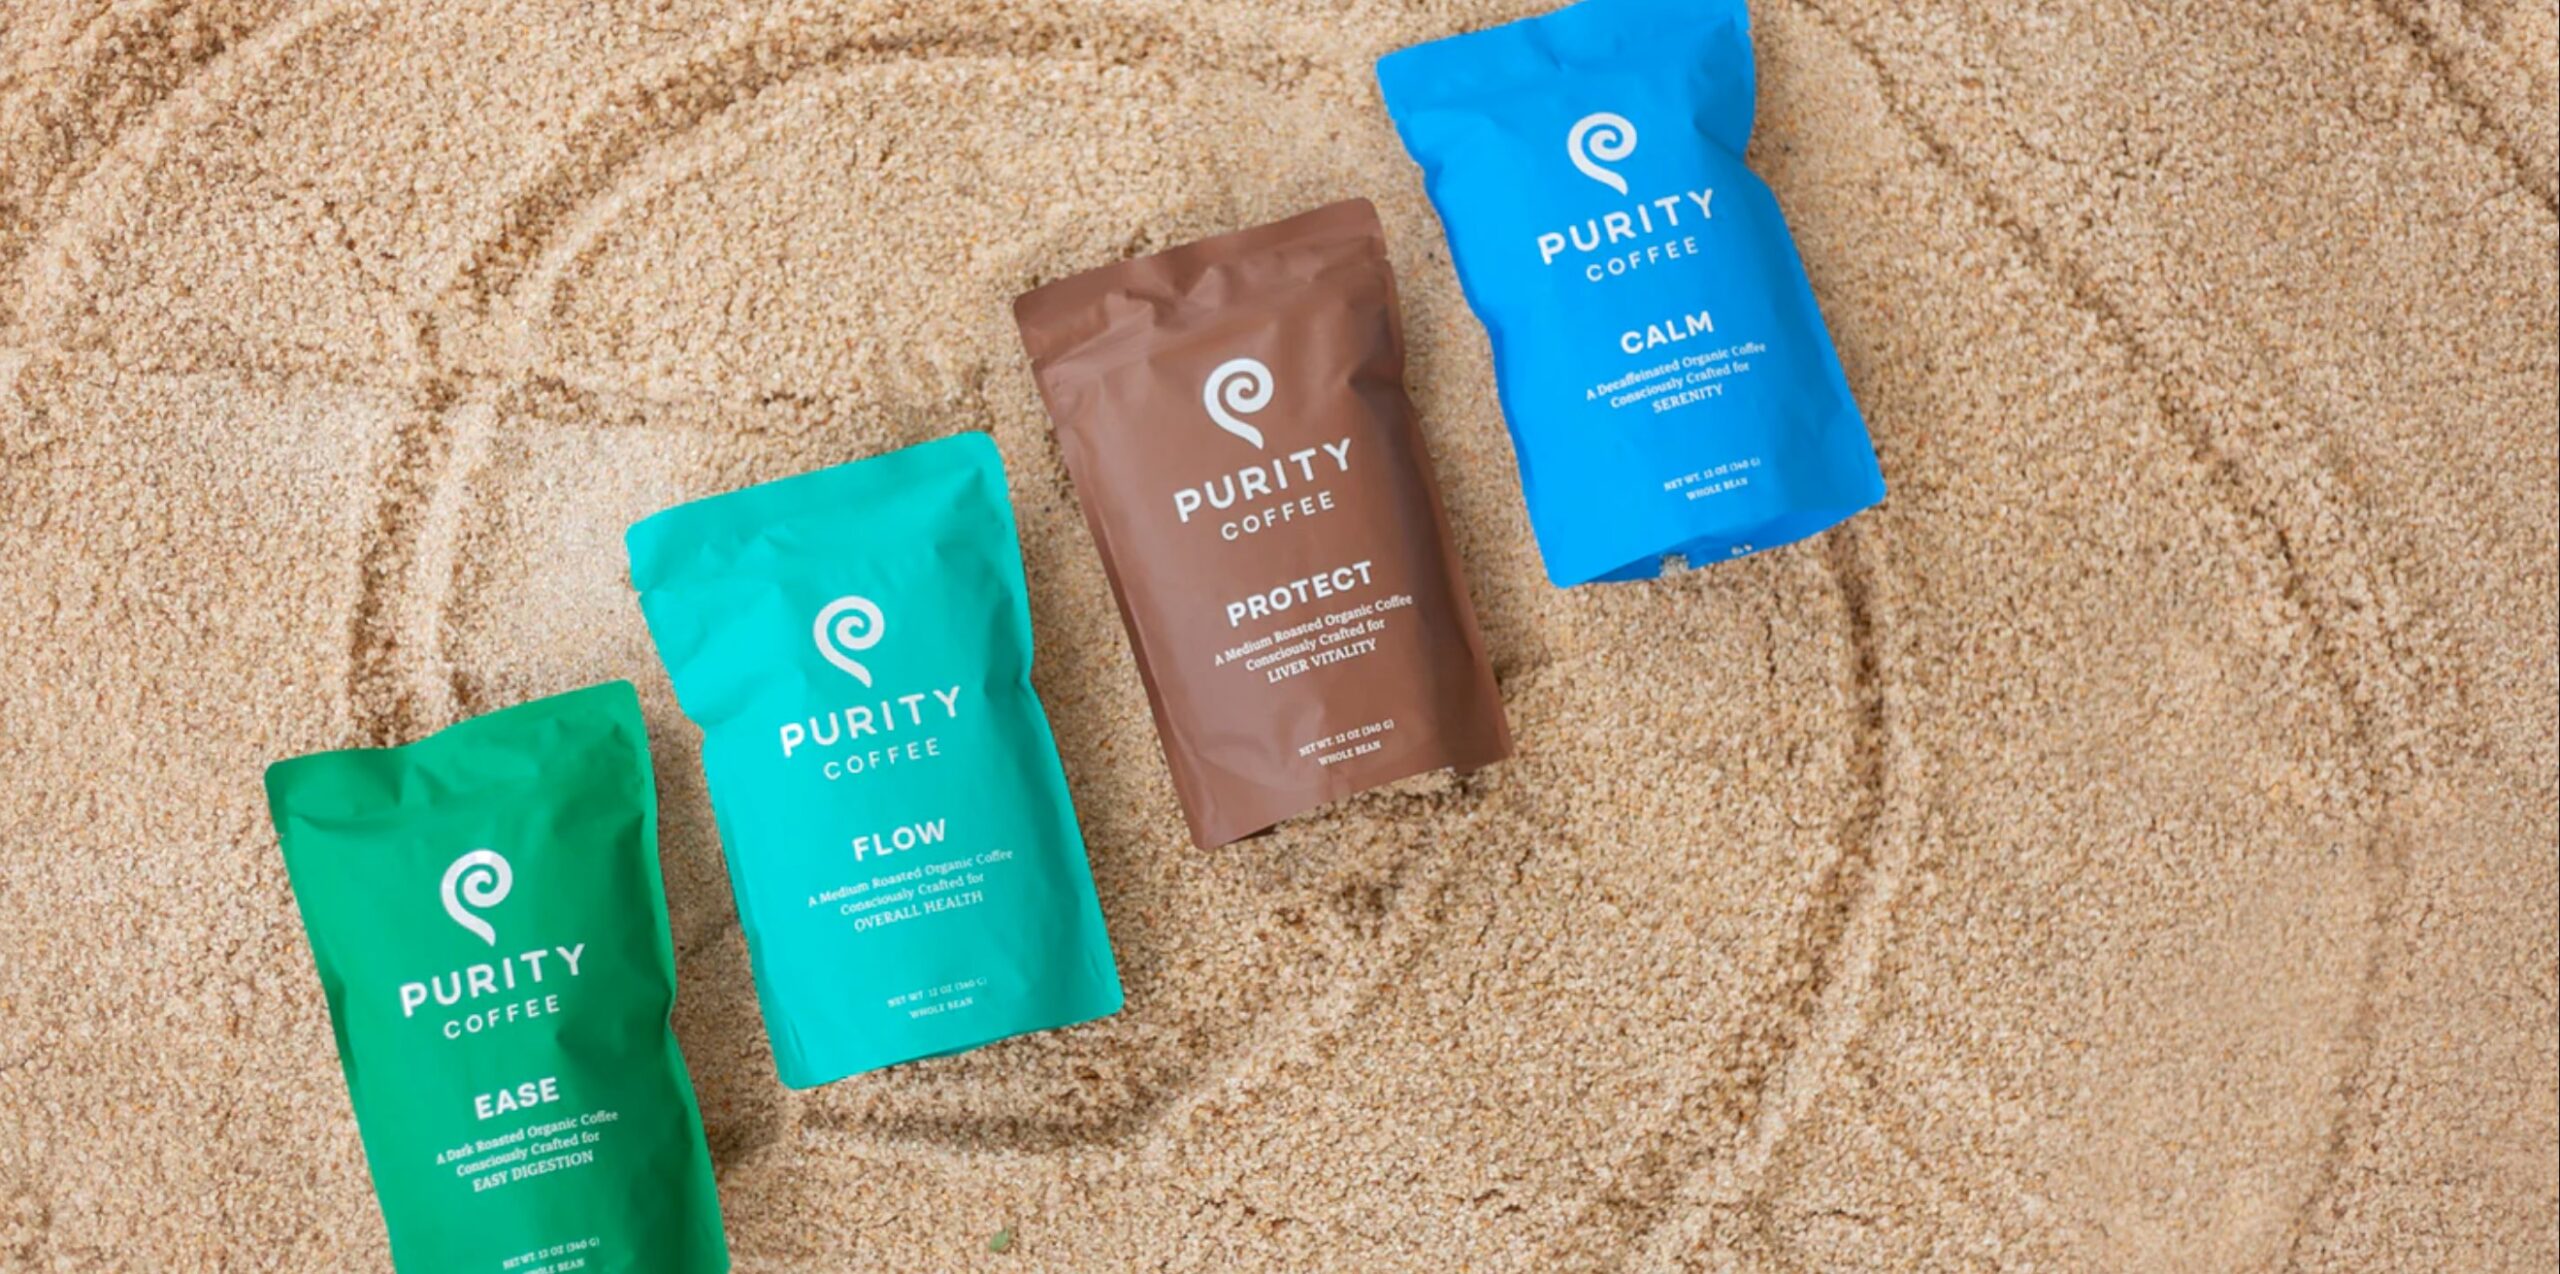 Three bags of Purity coffee lie in the sand.